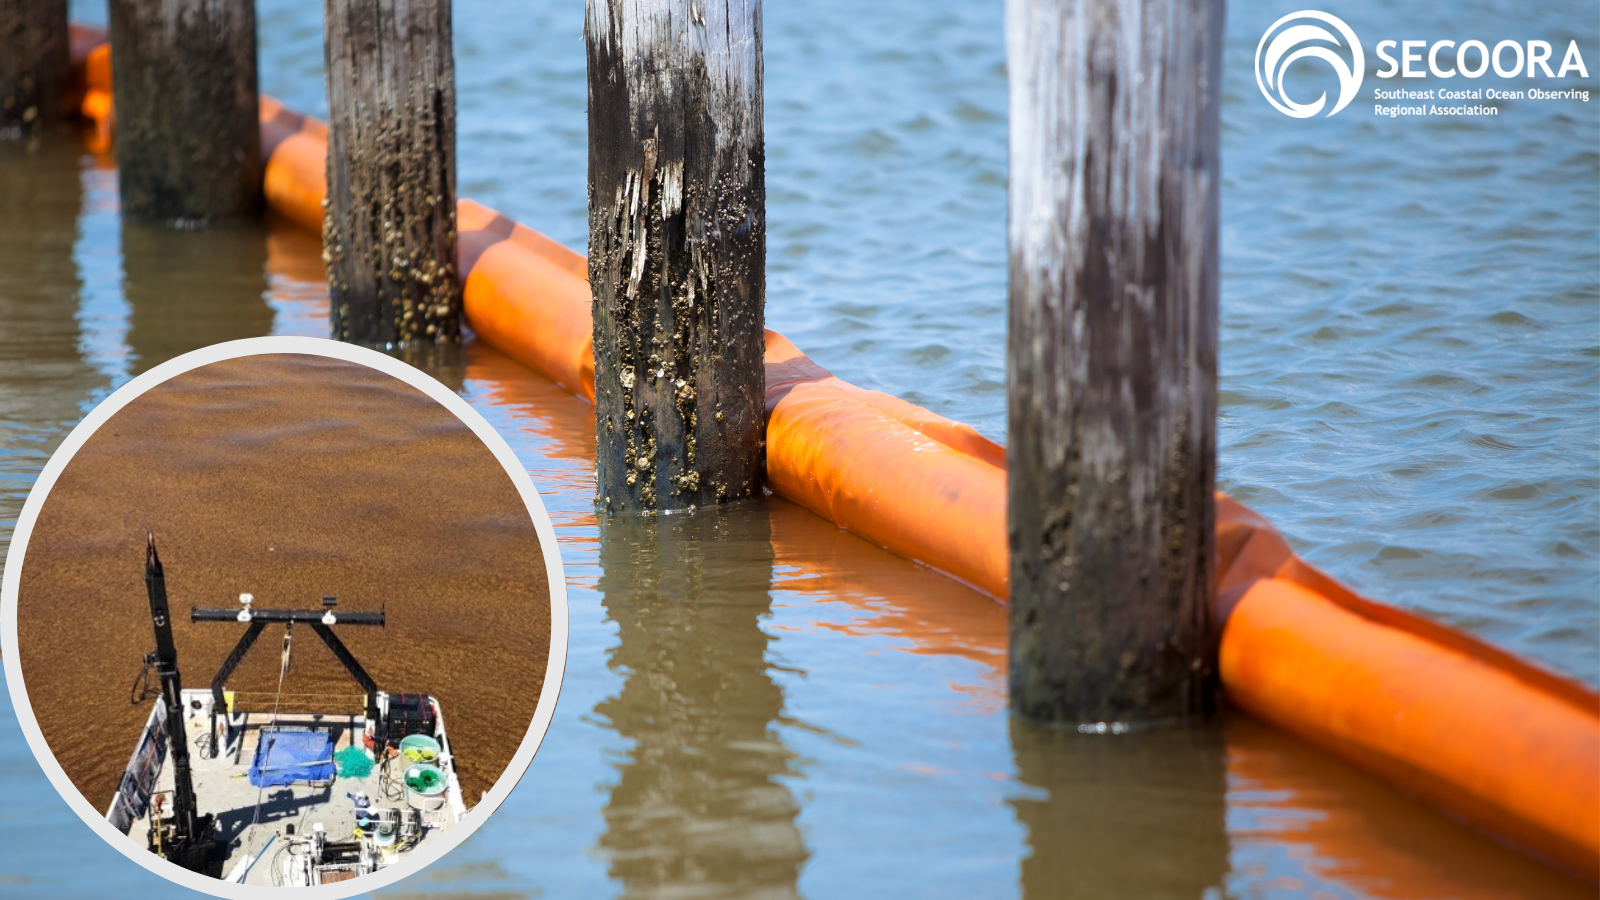 An image of a debris boom in the ocean next to a dock. In the lower left corner there is an image of a boat surrounded by seaweed.